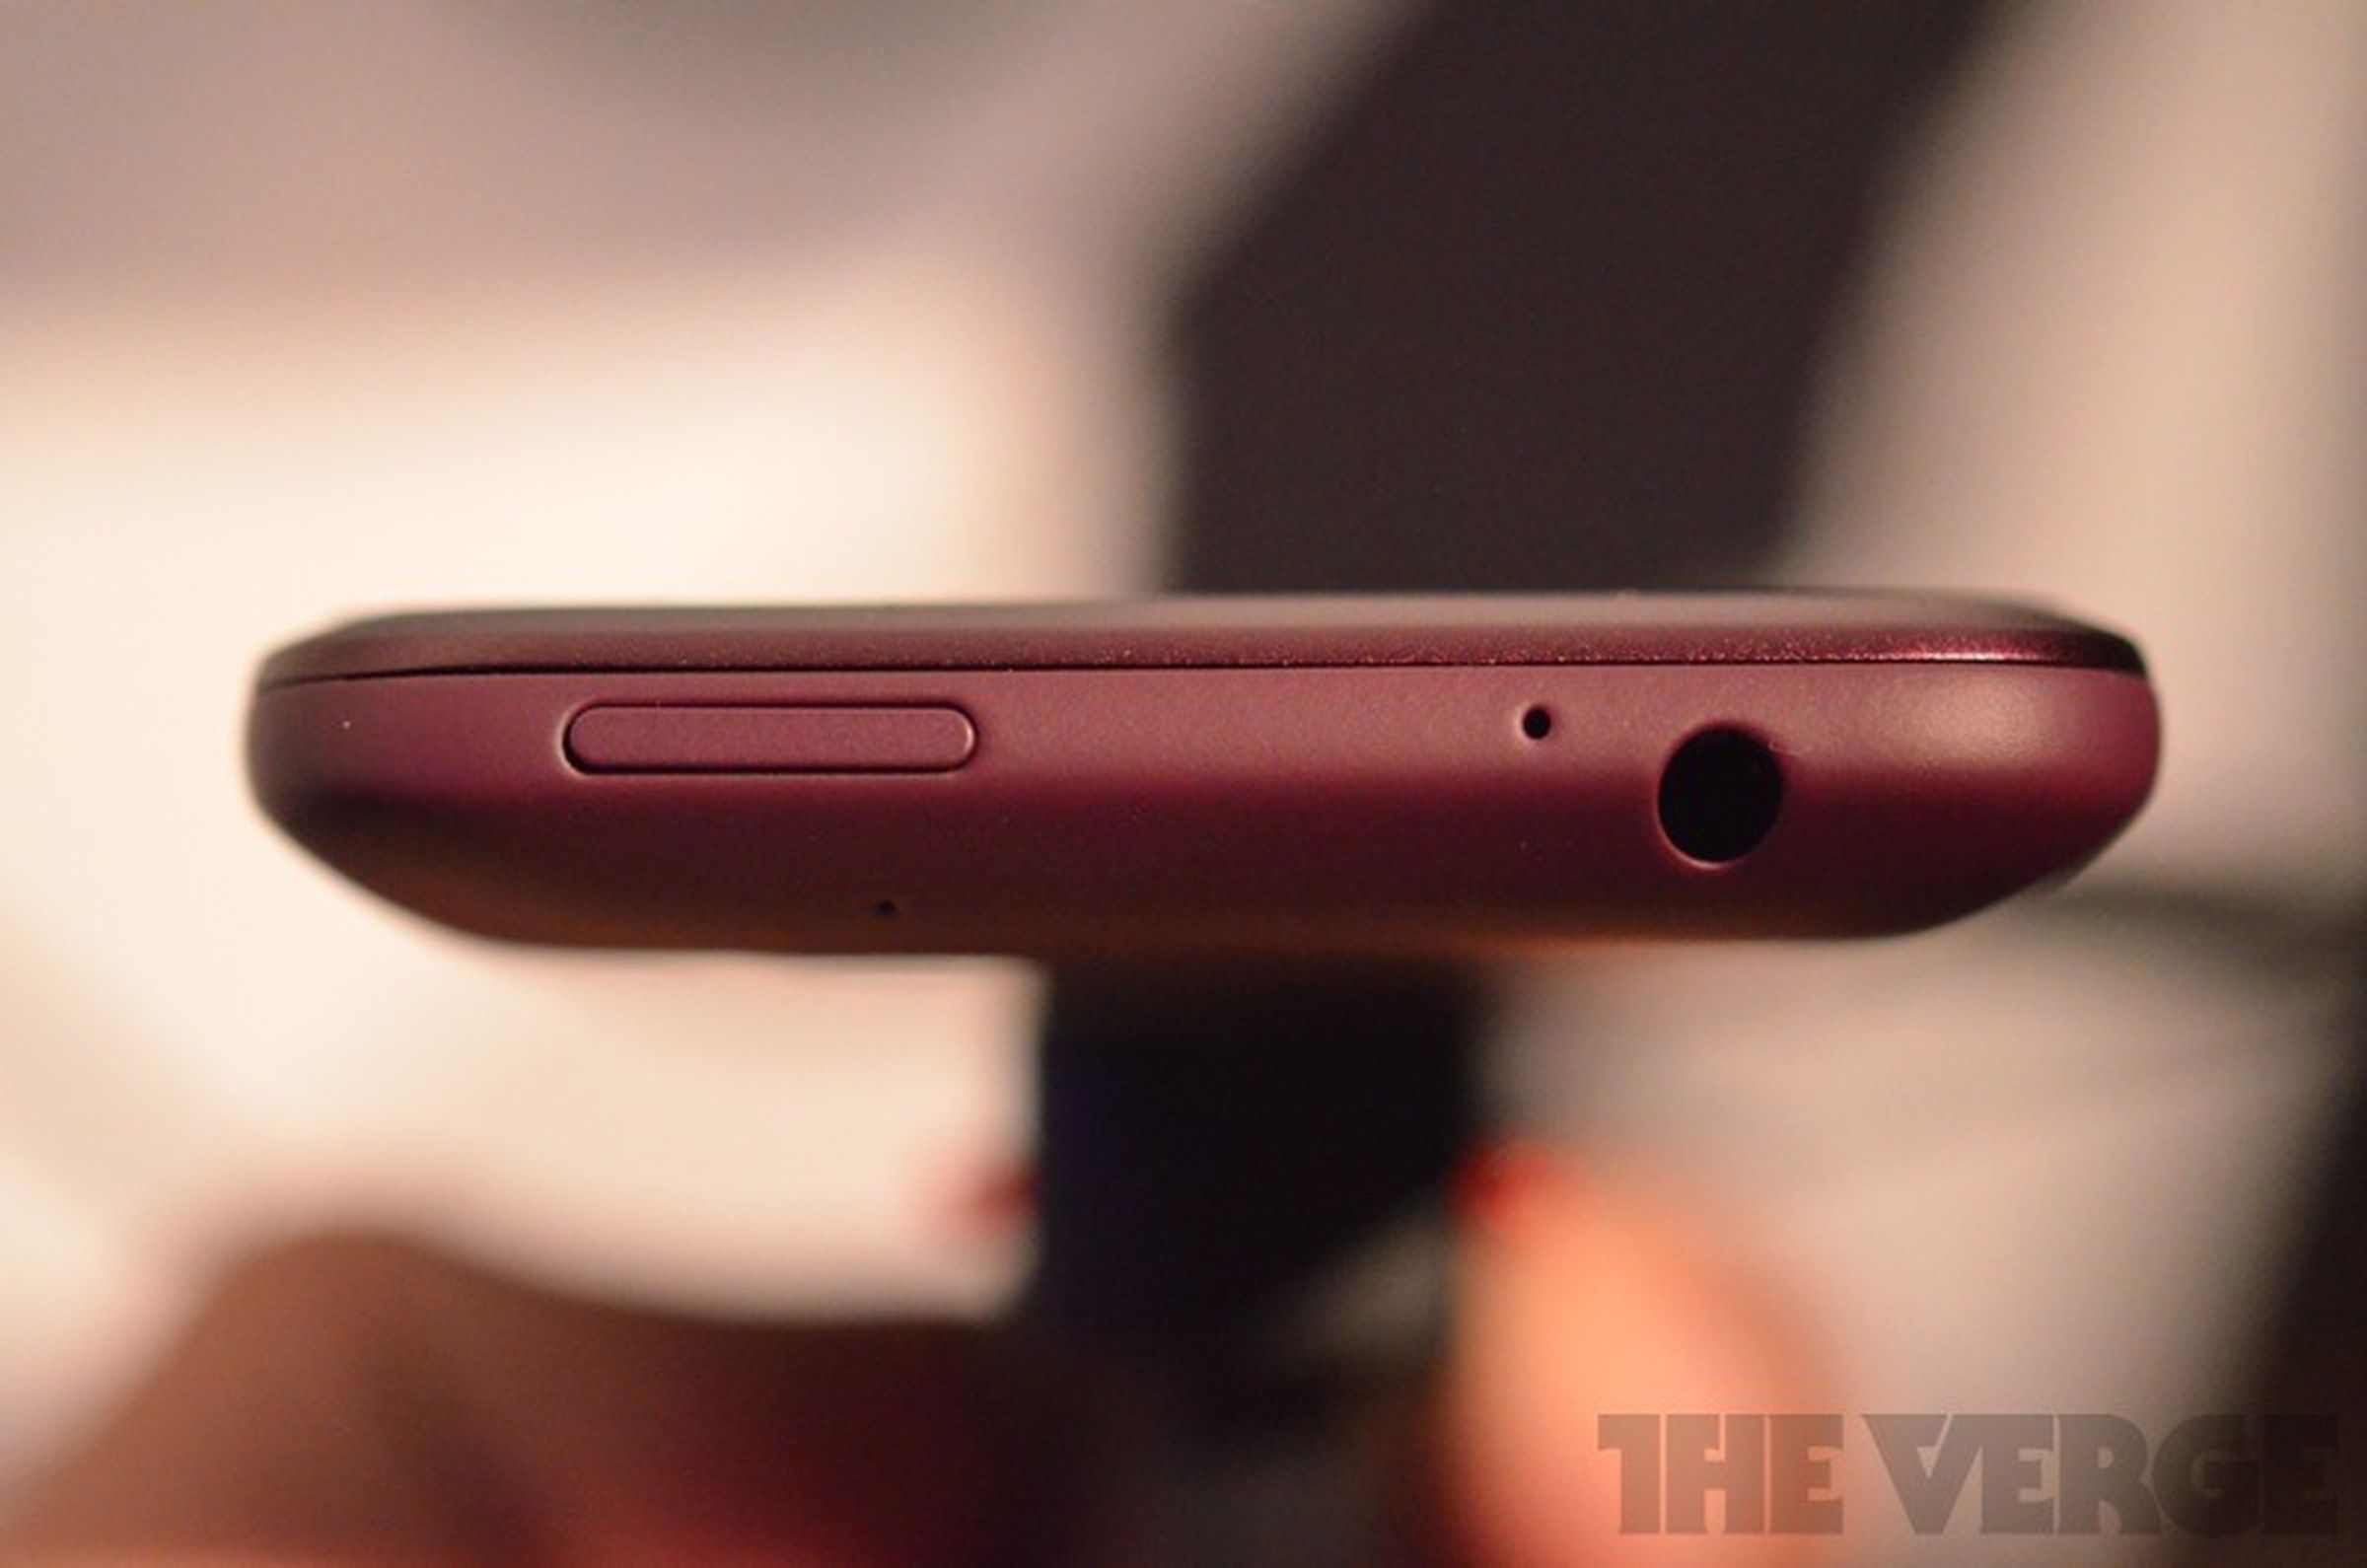 HTC Rhyme hands on photos